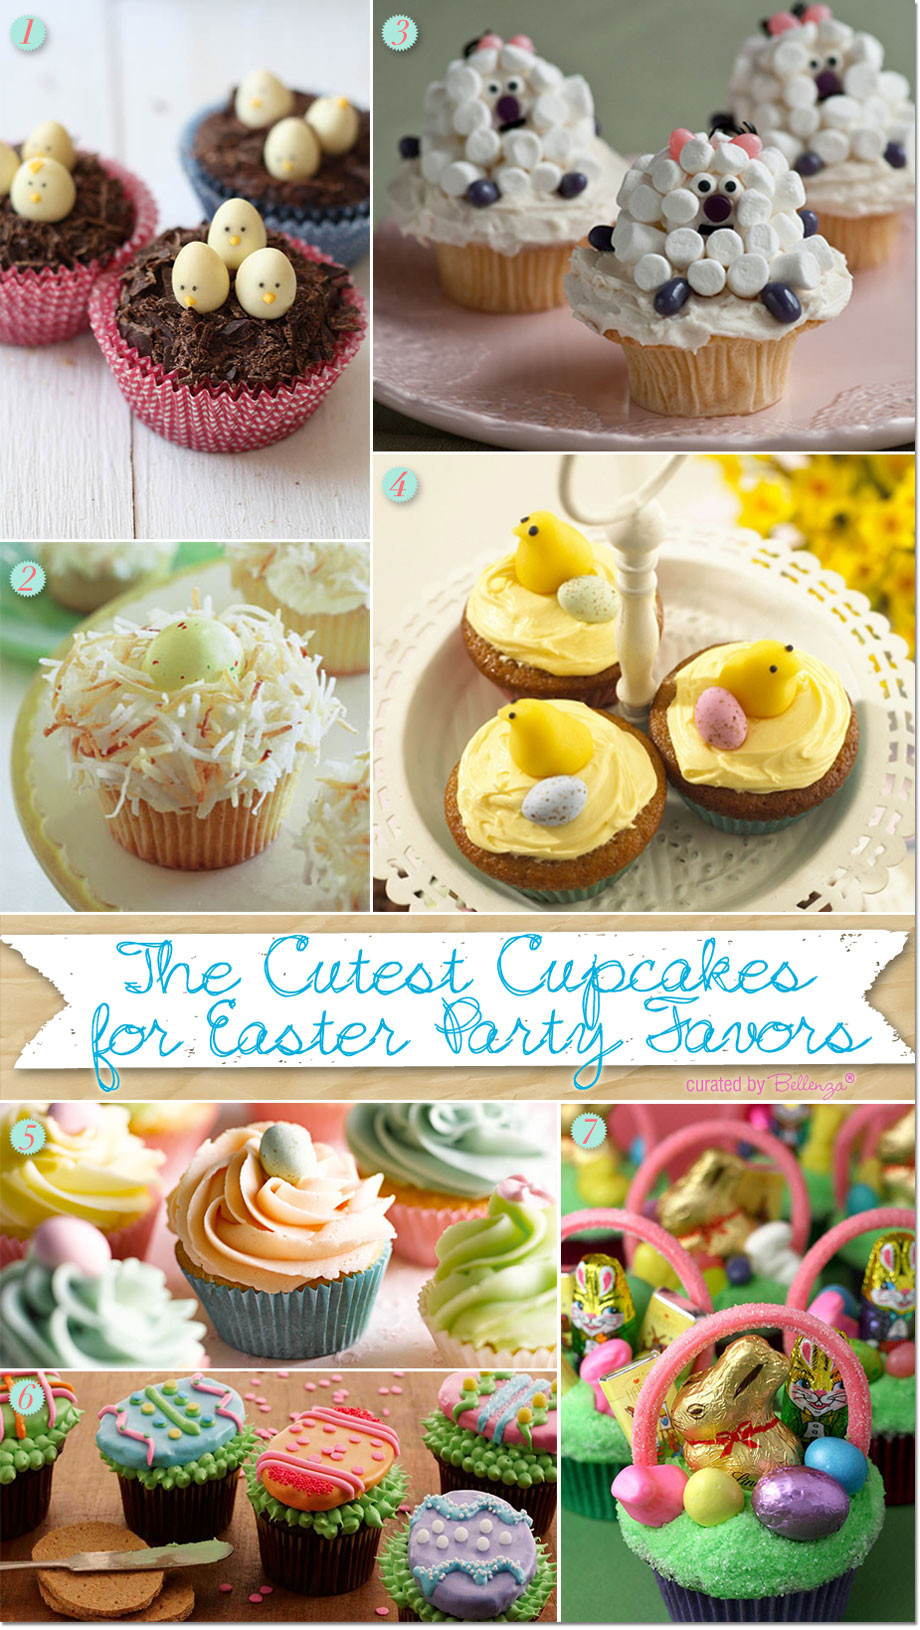 Cupcakes For Easter
 Fun Easter Cupcakes for Kids